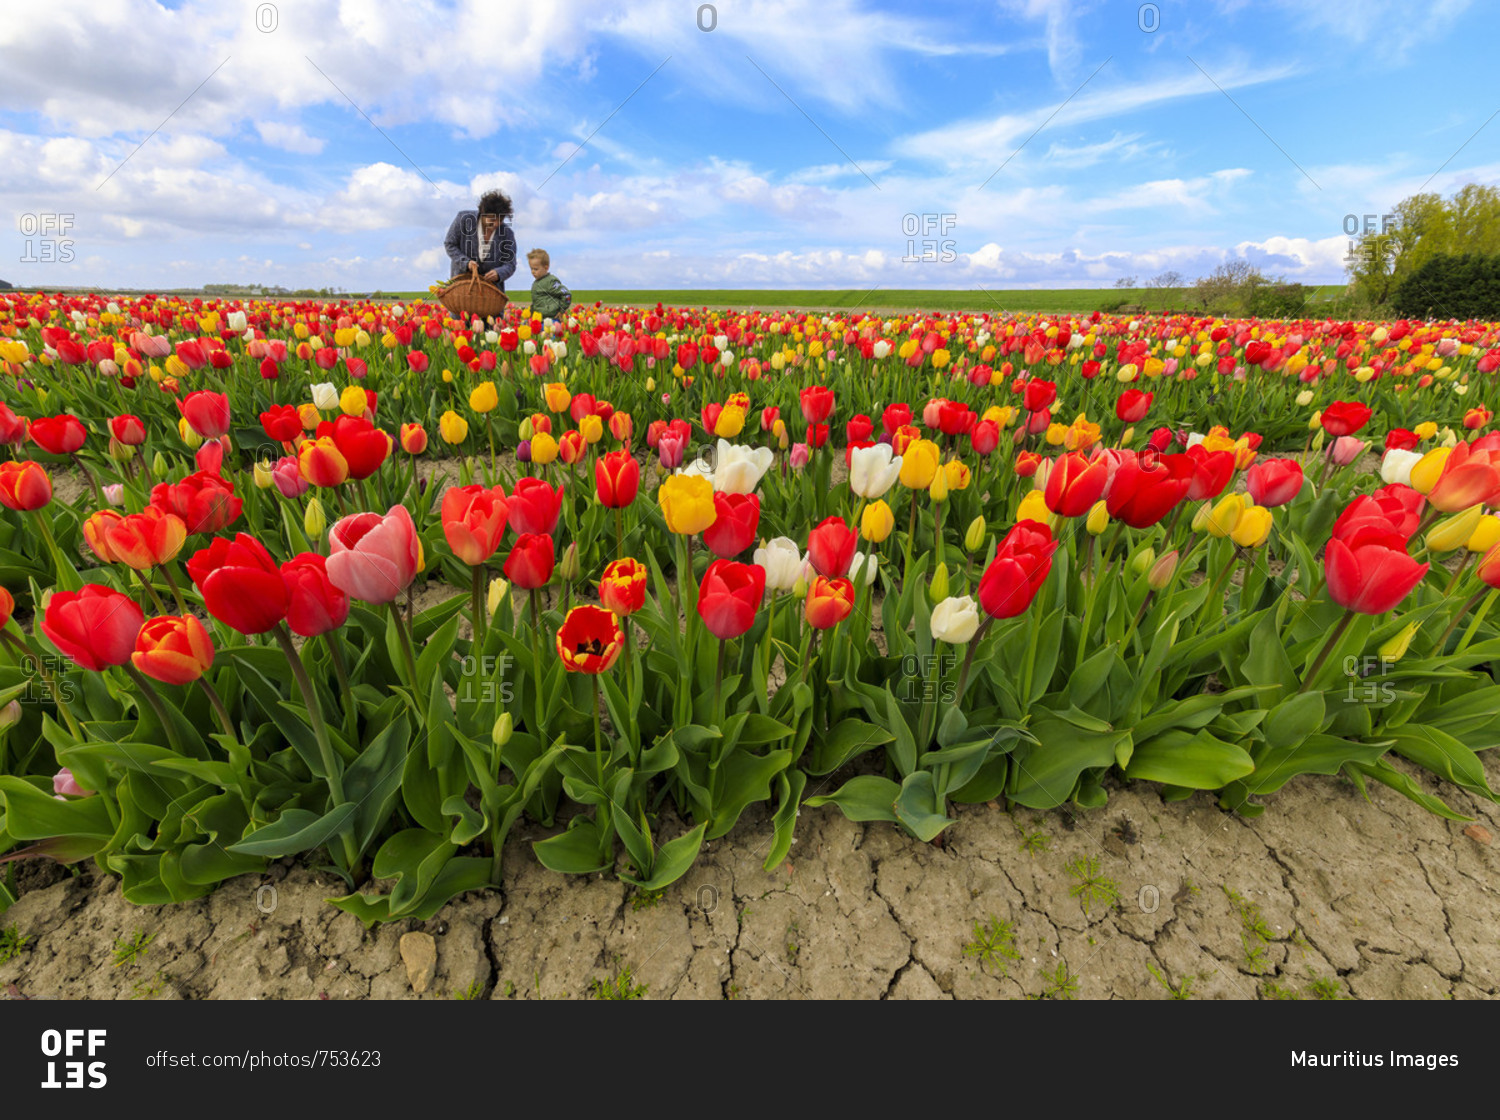 People collecting the multicolored tulips Yerseke Reimerswaal province of Zeeland Holland The Netherlands Europe